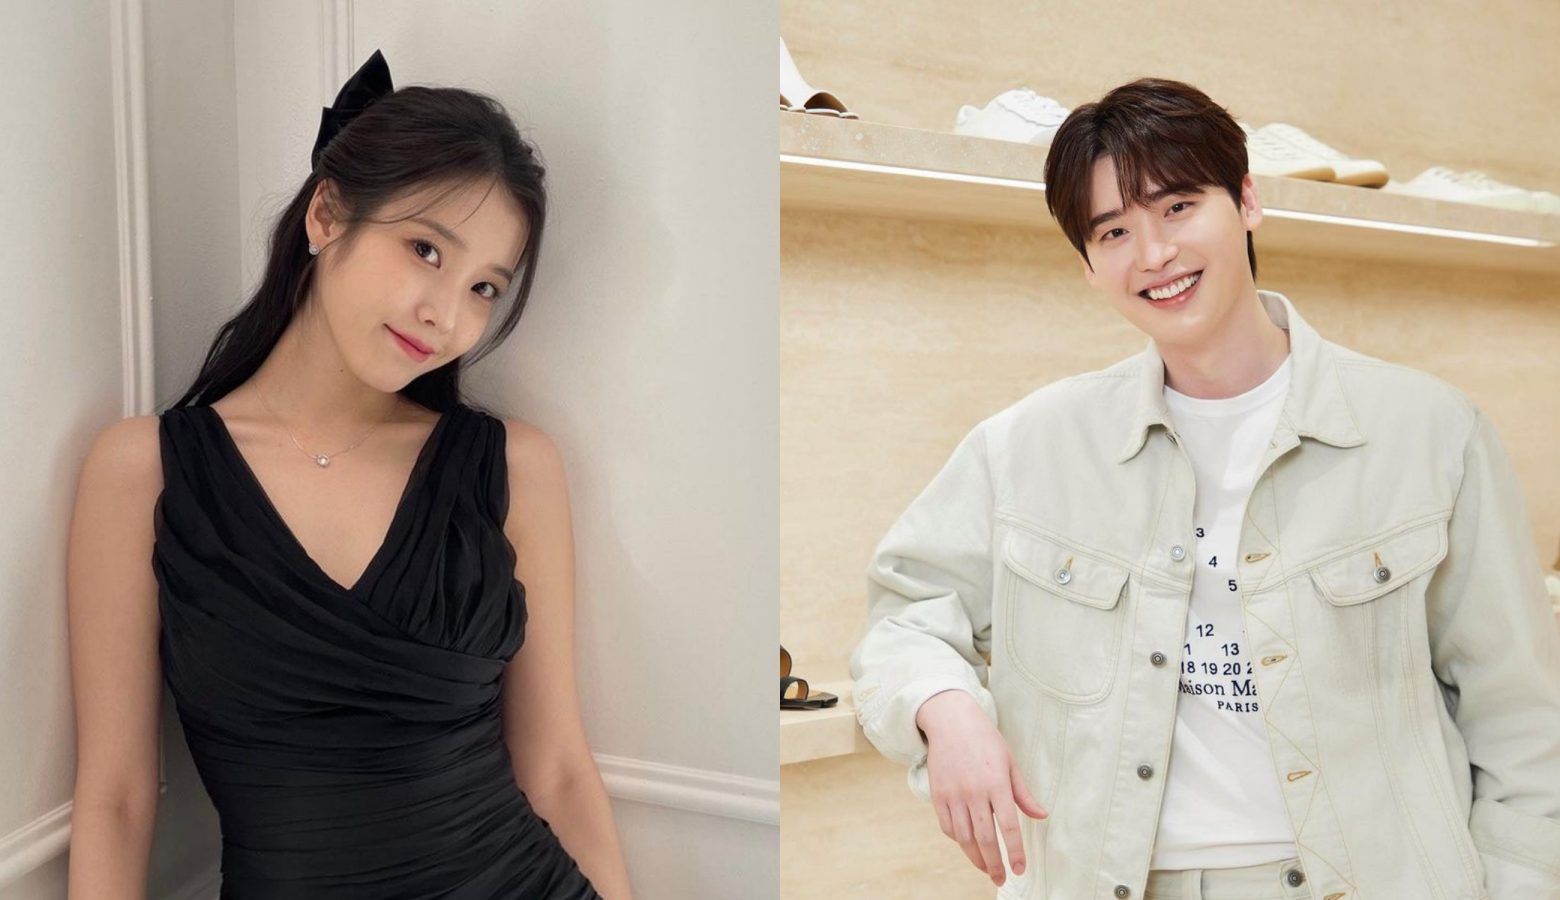 BFFs to lovers: A timeline of IU and Lee Jong-Suk’s magical love story